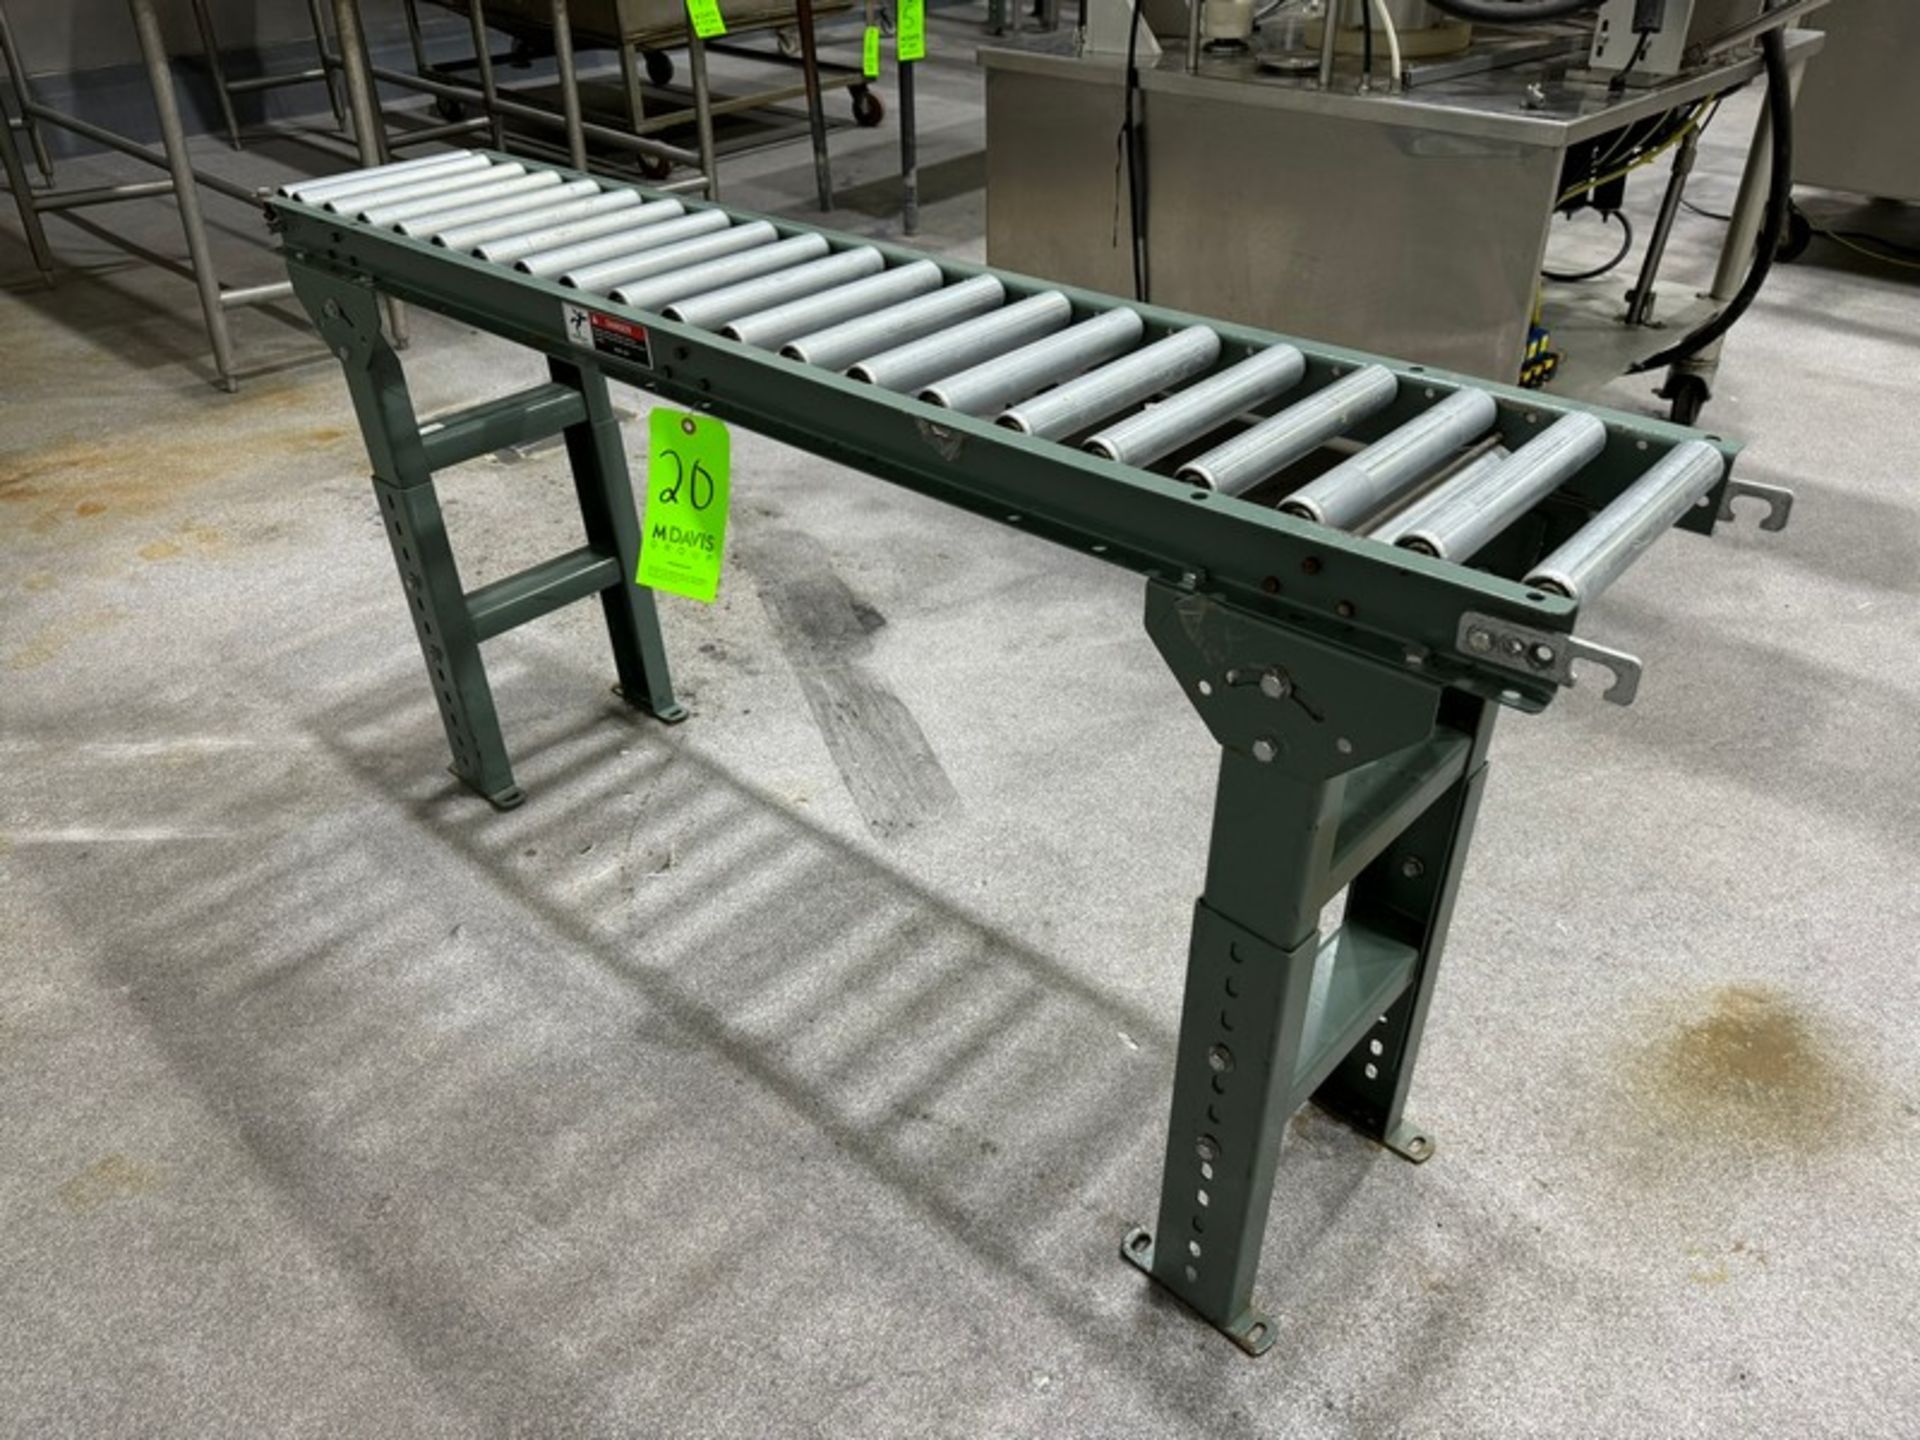 Straight Section of Roller Conveyor